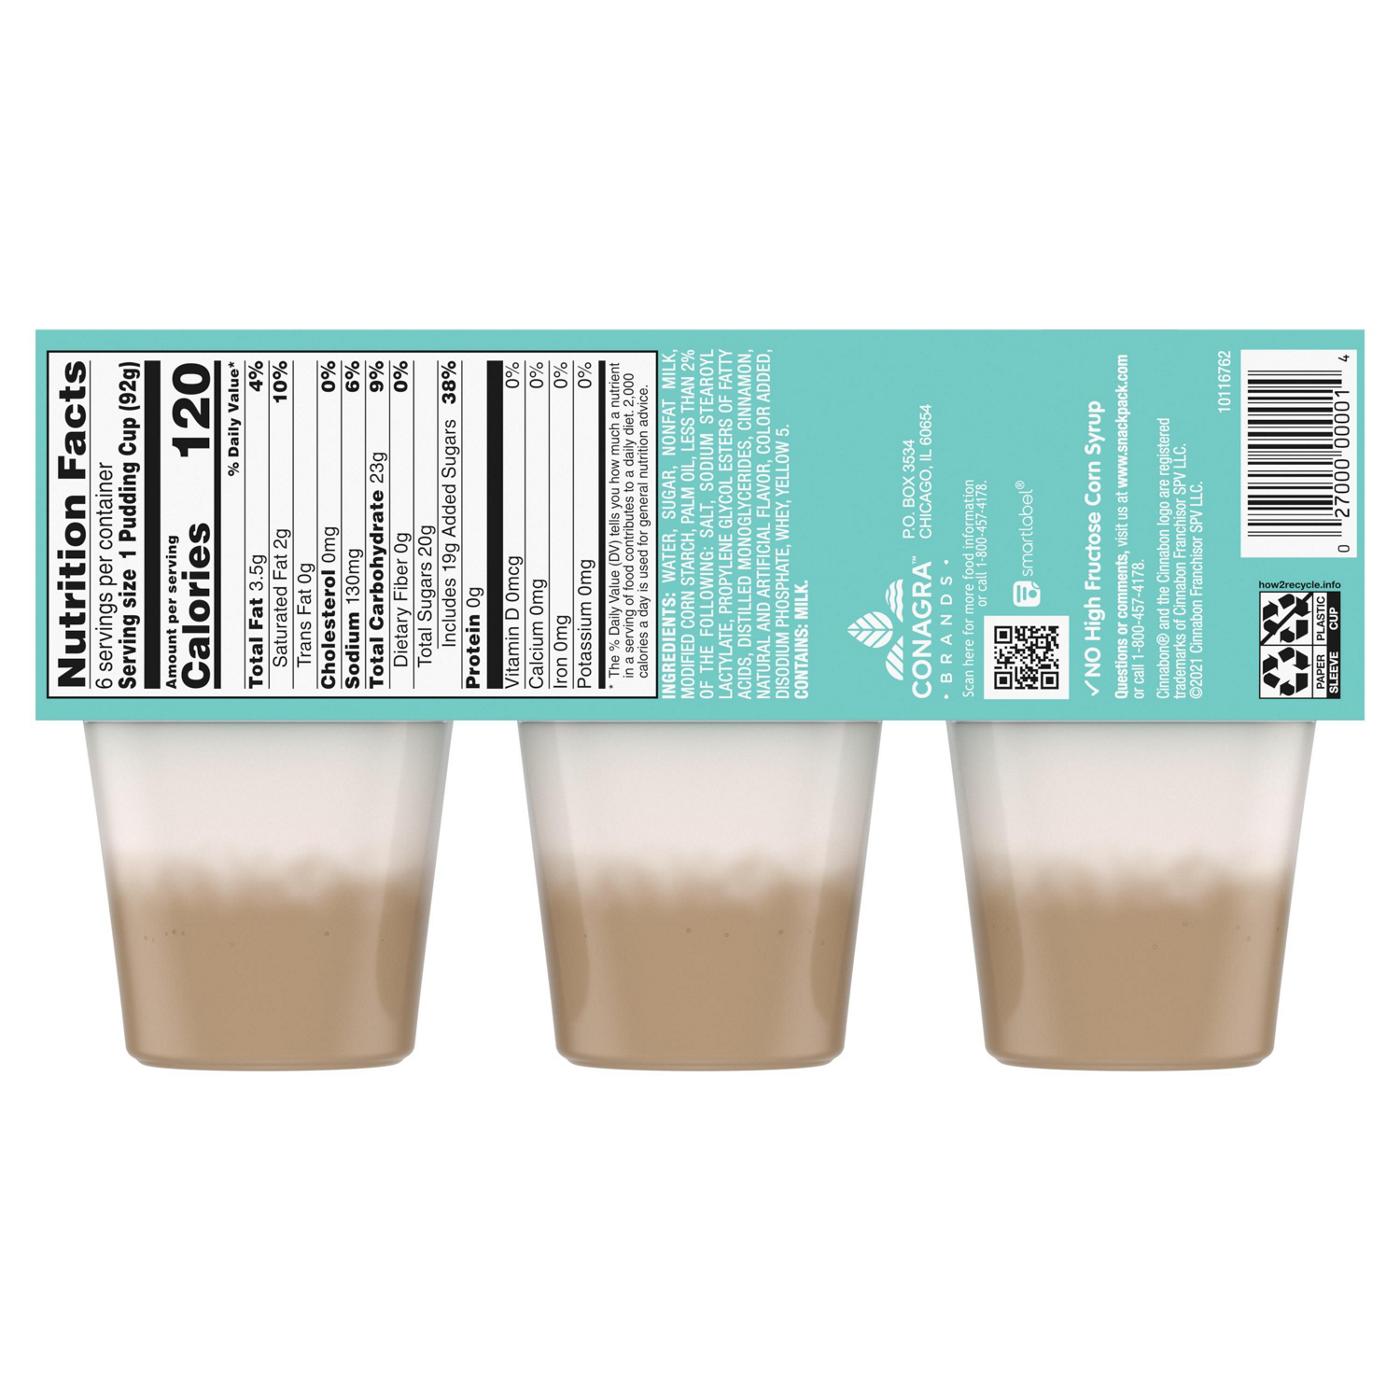 Snack Pack Cinnabon Pudding Cups; image 2 of 2